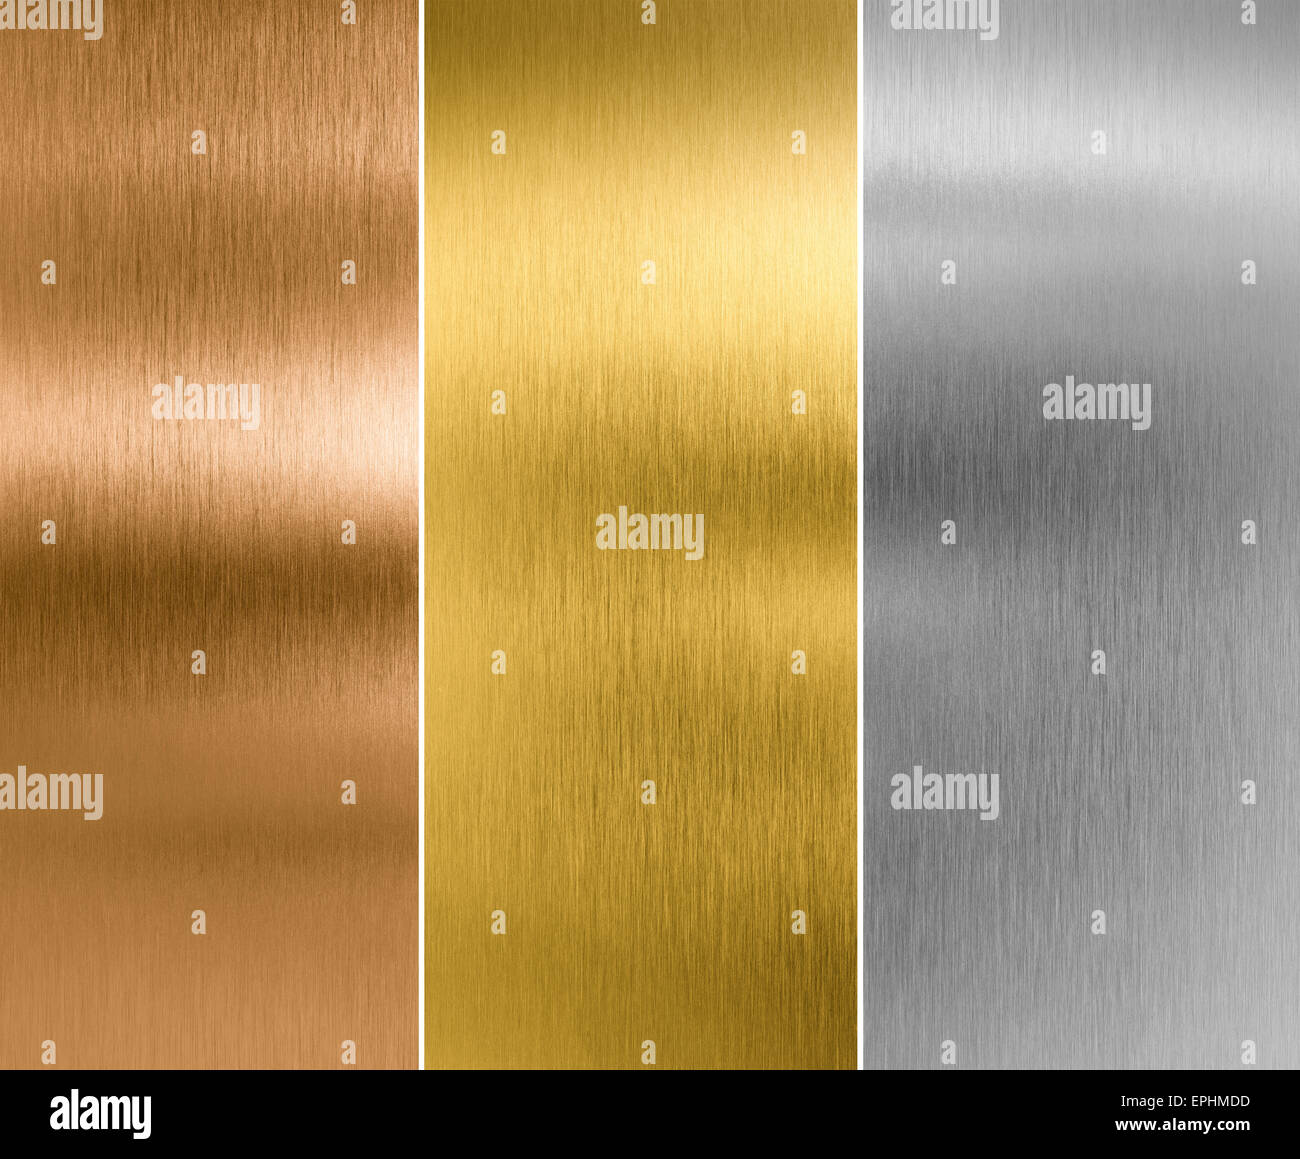 silver, gold and bronze metal texture backgrounds Stock Photo